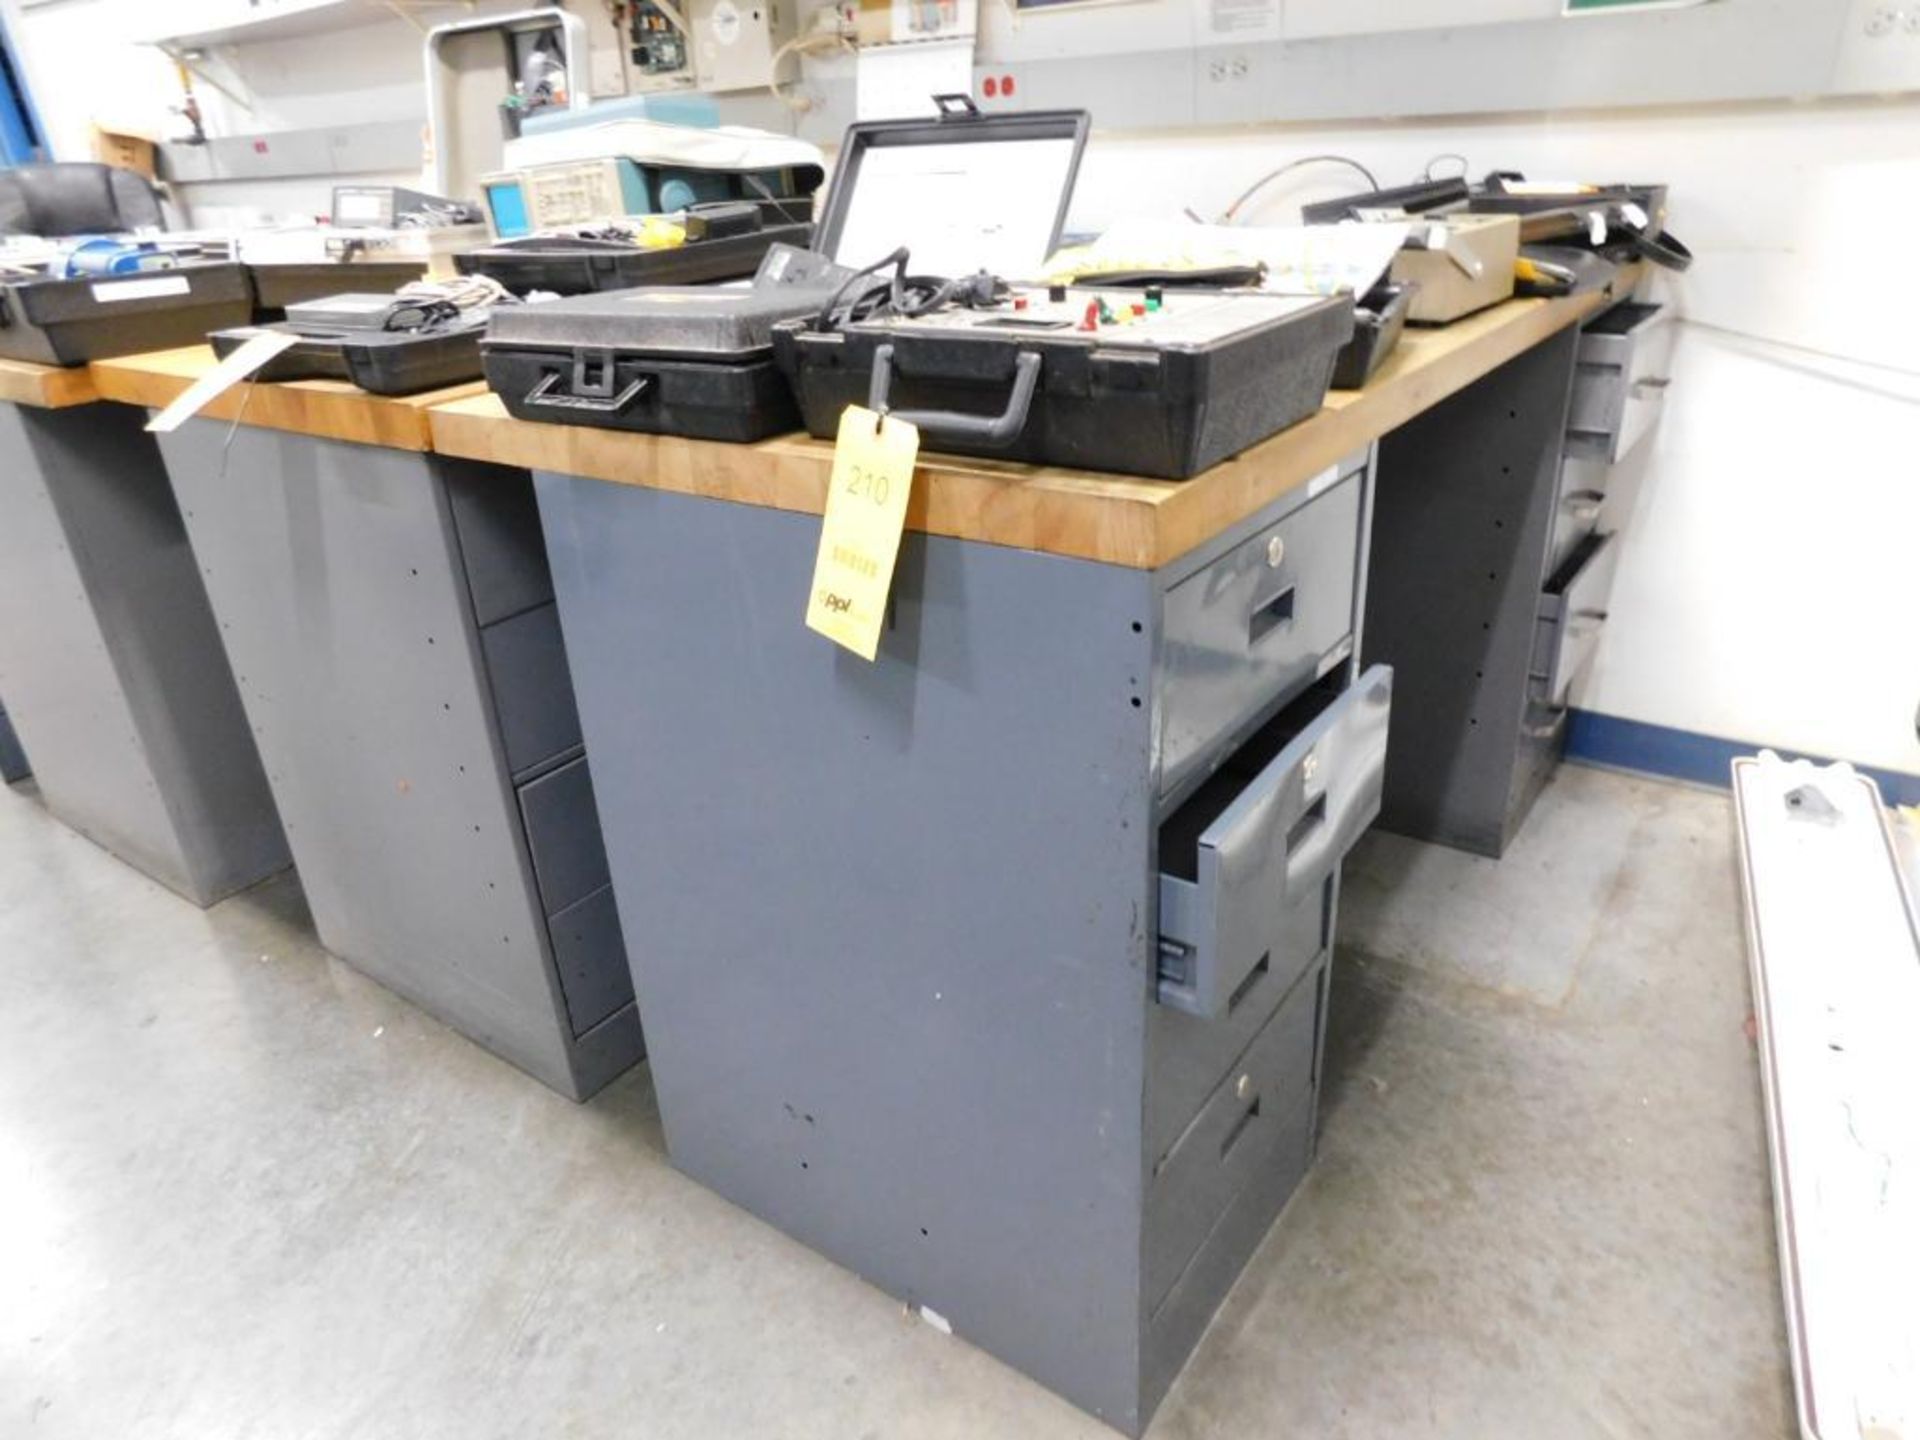 LOT: (4) 60" x 30" Maple Top Workbenches (NO CONTENTS) (LOCATION: IN MACHINE SHOP, 2ND FLOOR) - Image 2 of 5